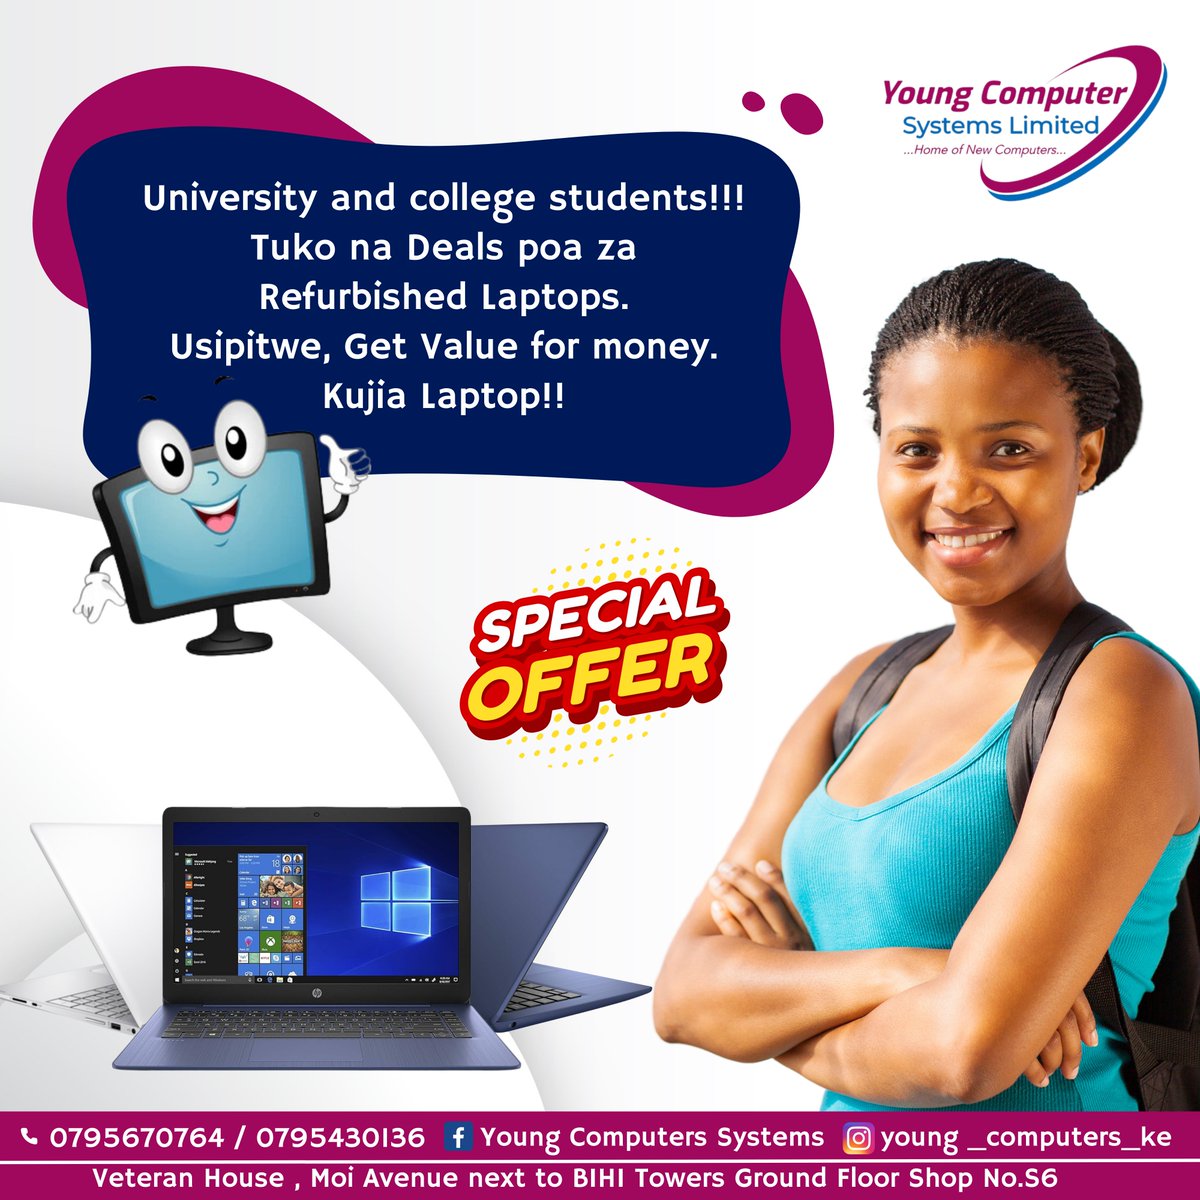 Are you a university or college student looking to power up your academic excellence and ace those assignments this semester? 🎓💻 Upgrade your academic journey with our exclusive laptop sale🔥 at unbeatable prices.
#laptopsforstudents #youngcomputerssystems #refurbishedlaptops